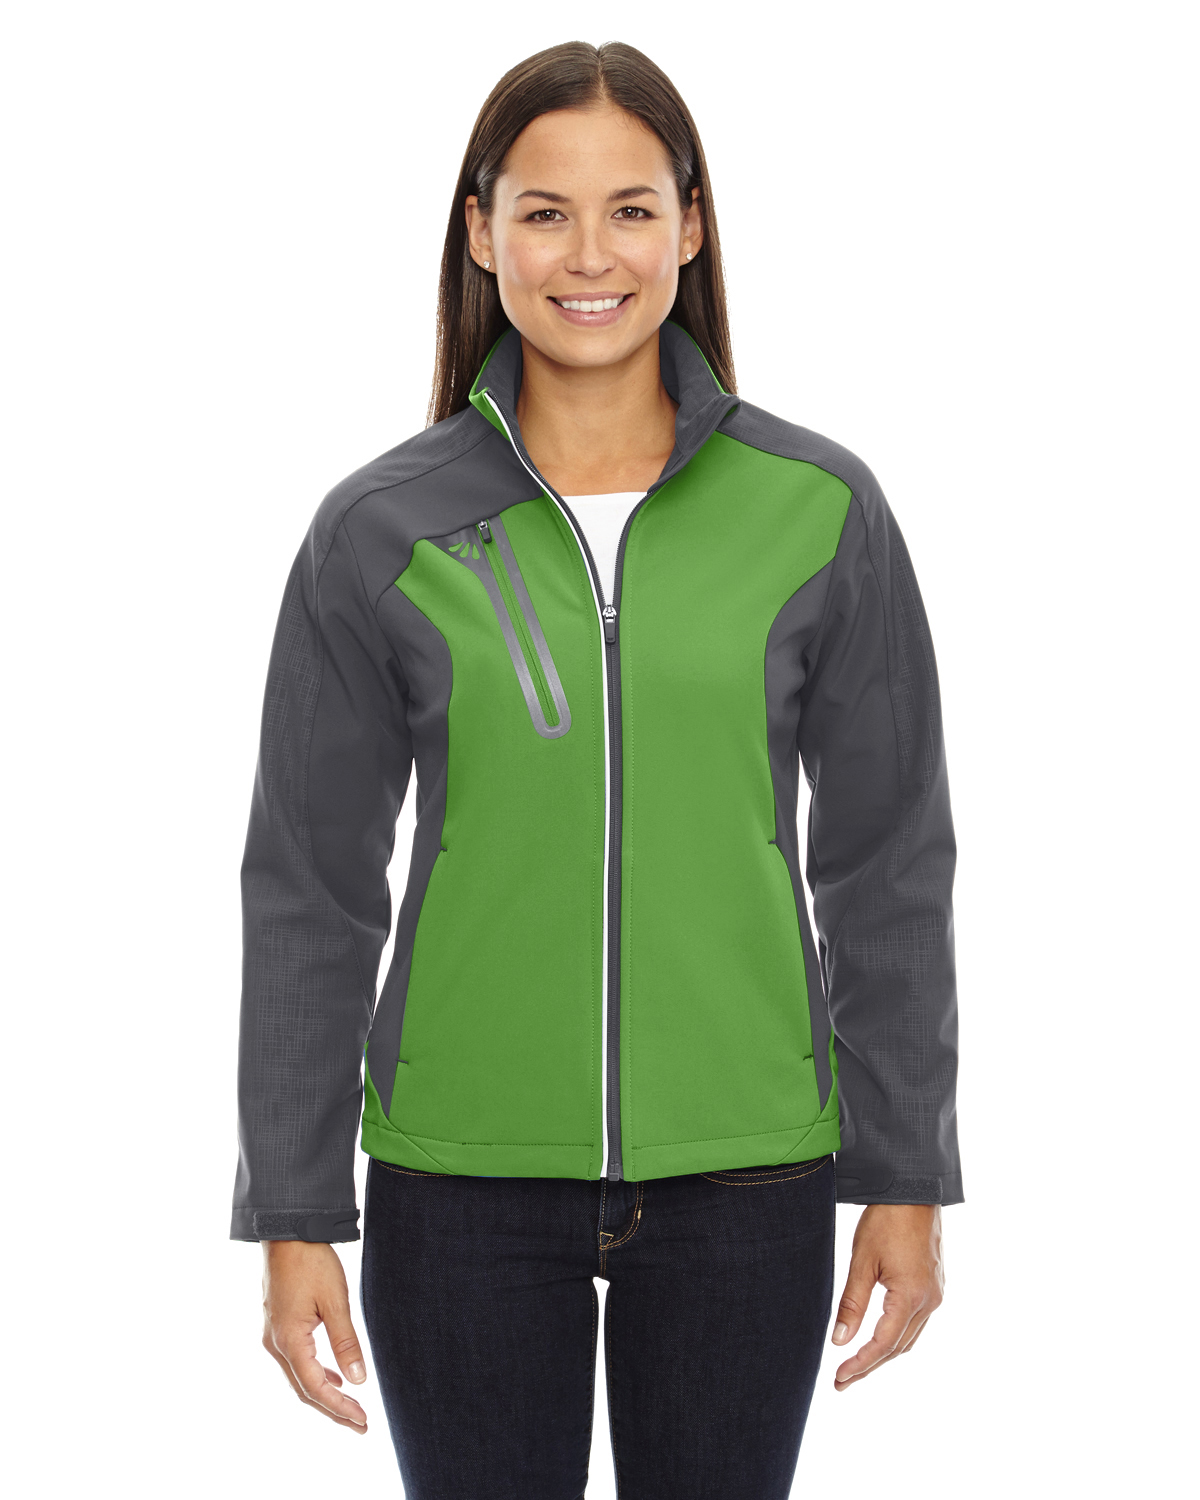 The Ash City - North End Ladies' Terrain Colorblock Soft Shell with Embossed Print - VALLEY GREEN 448 - S - image 1 of 2